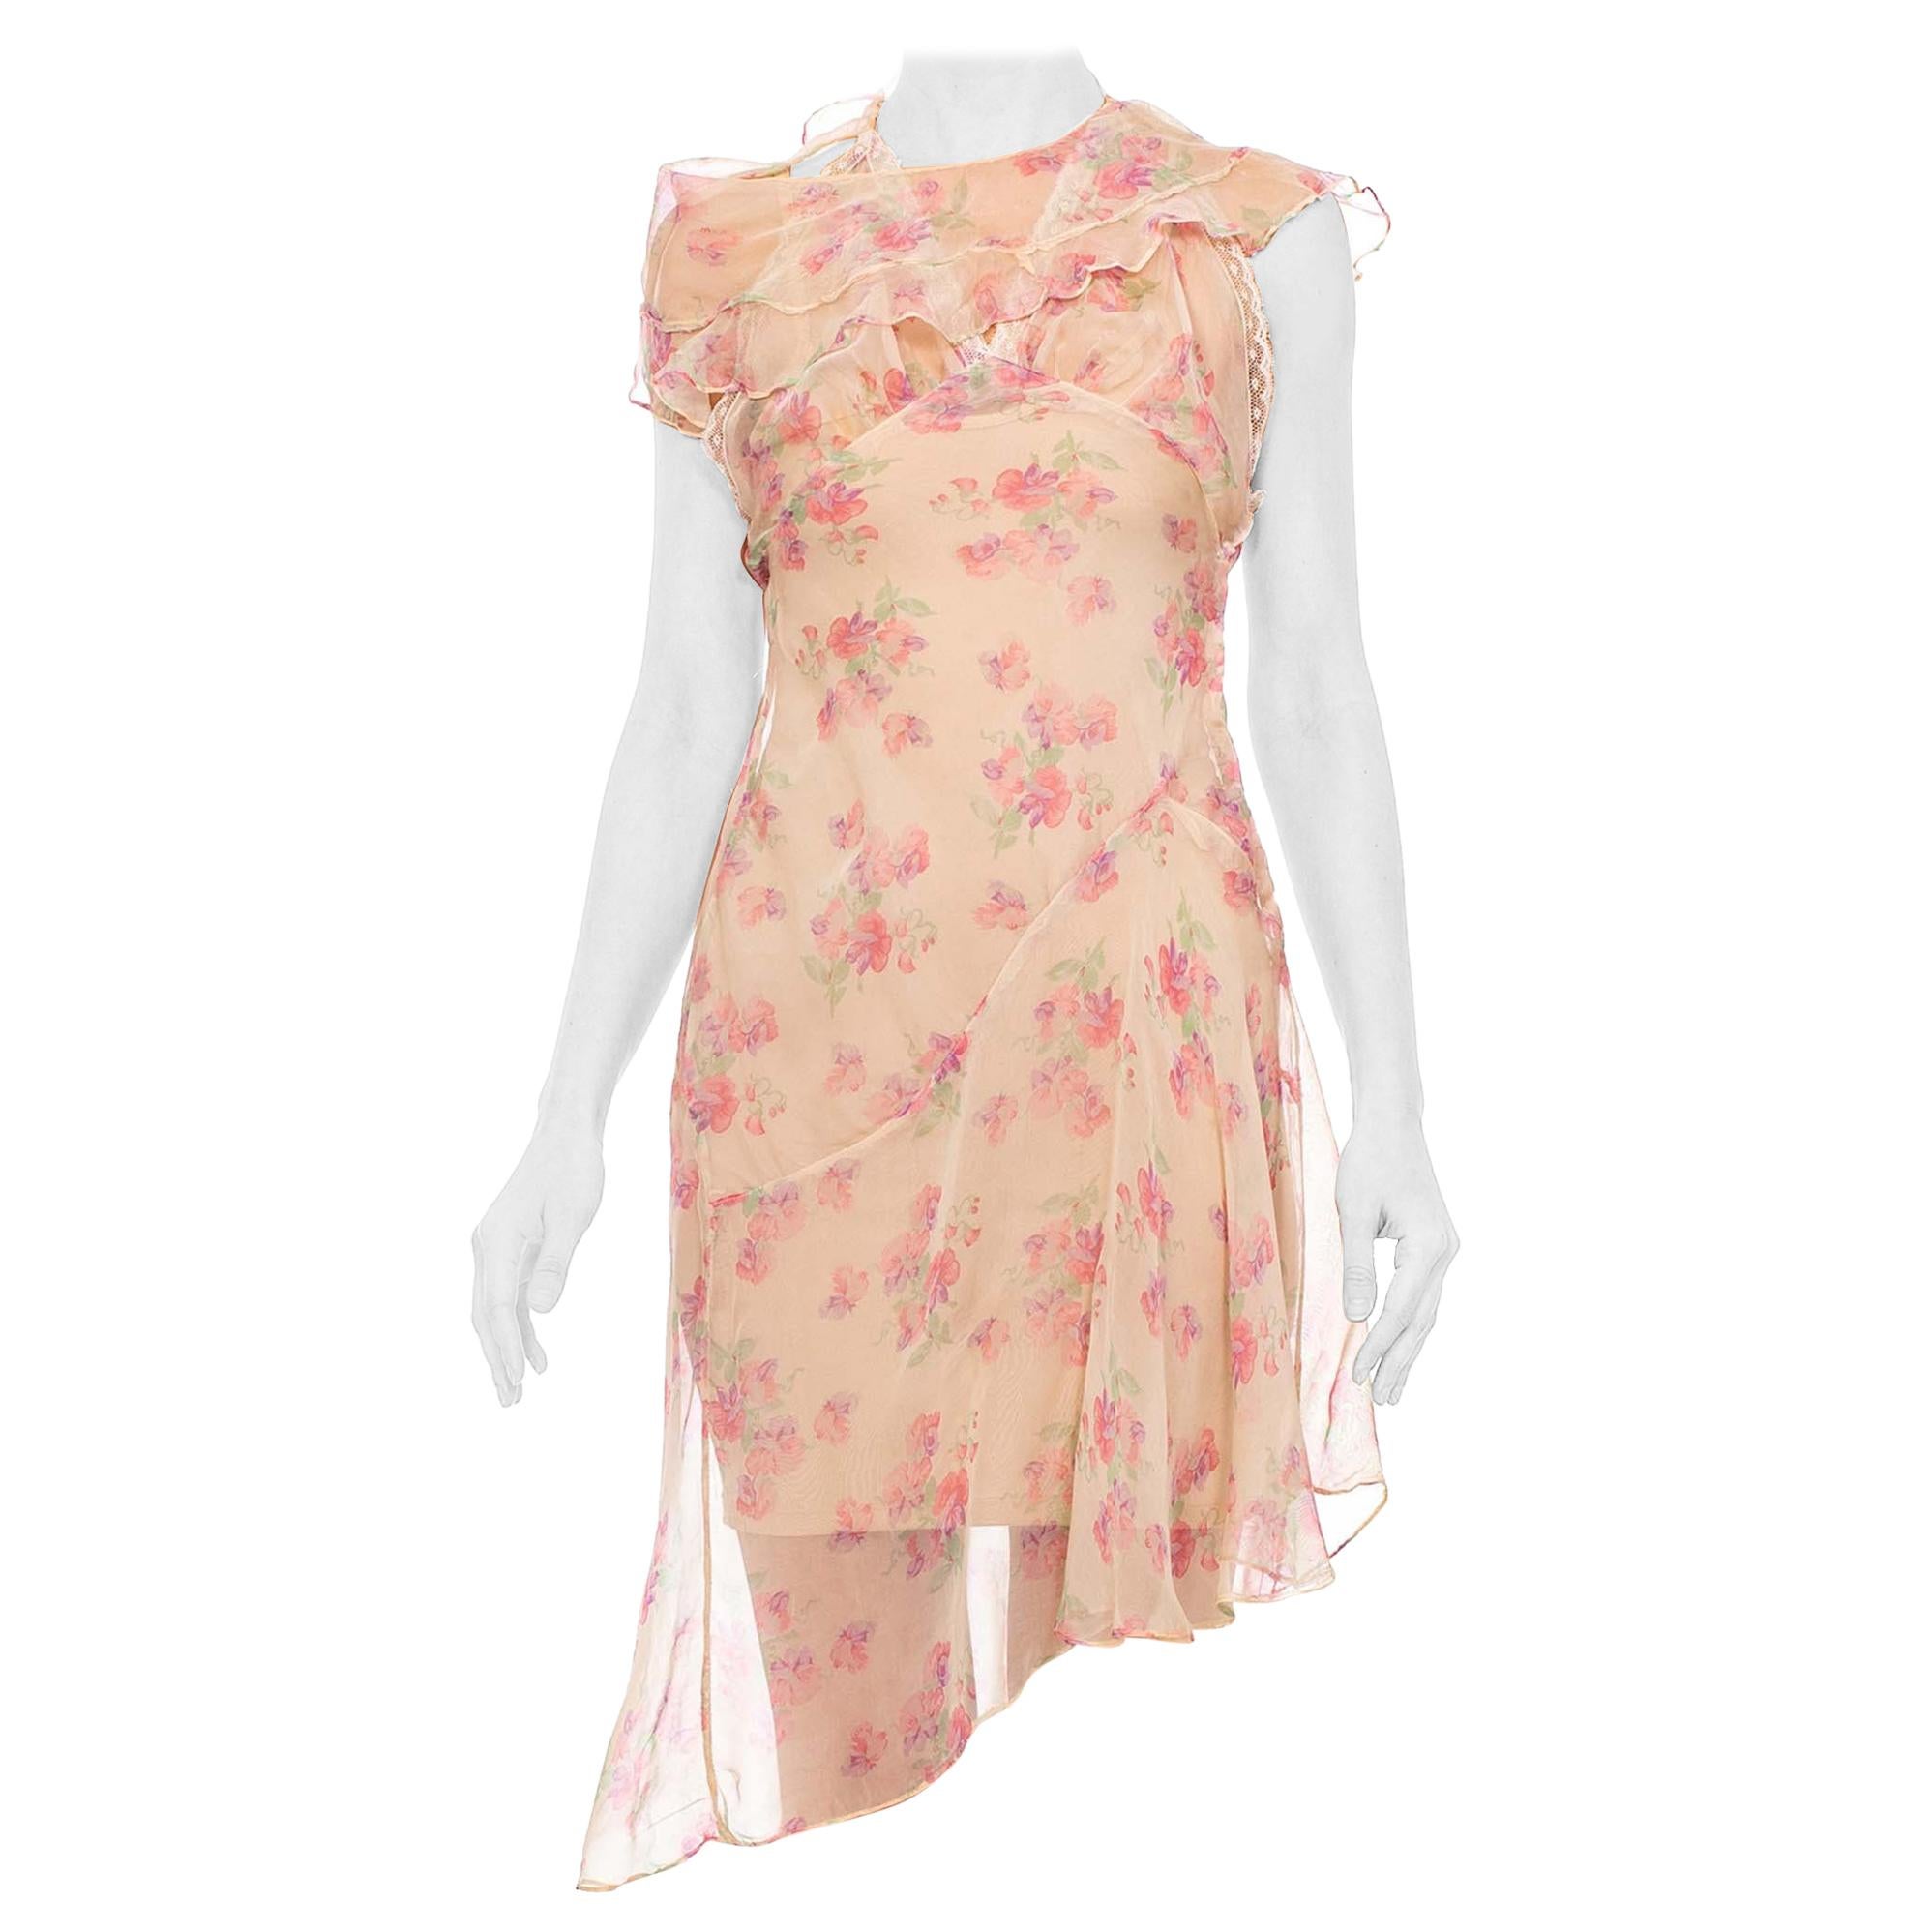 MORPHEW COLLECTION Baby Pink Floral Silk Chiffon Dress With Ruffle Cape Back